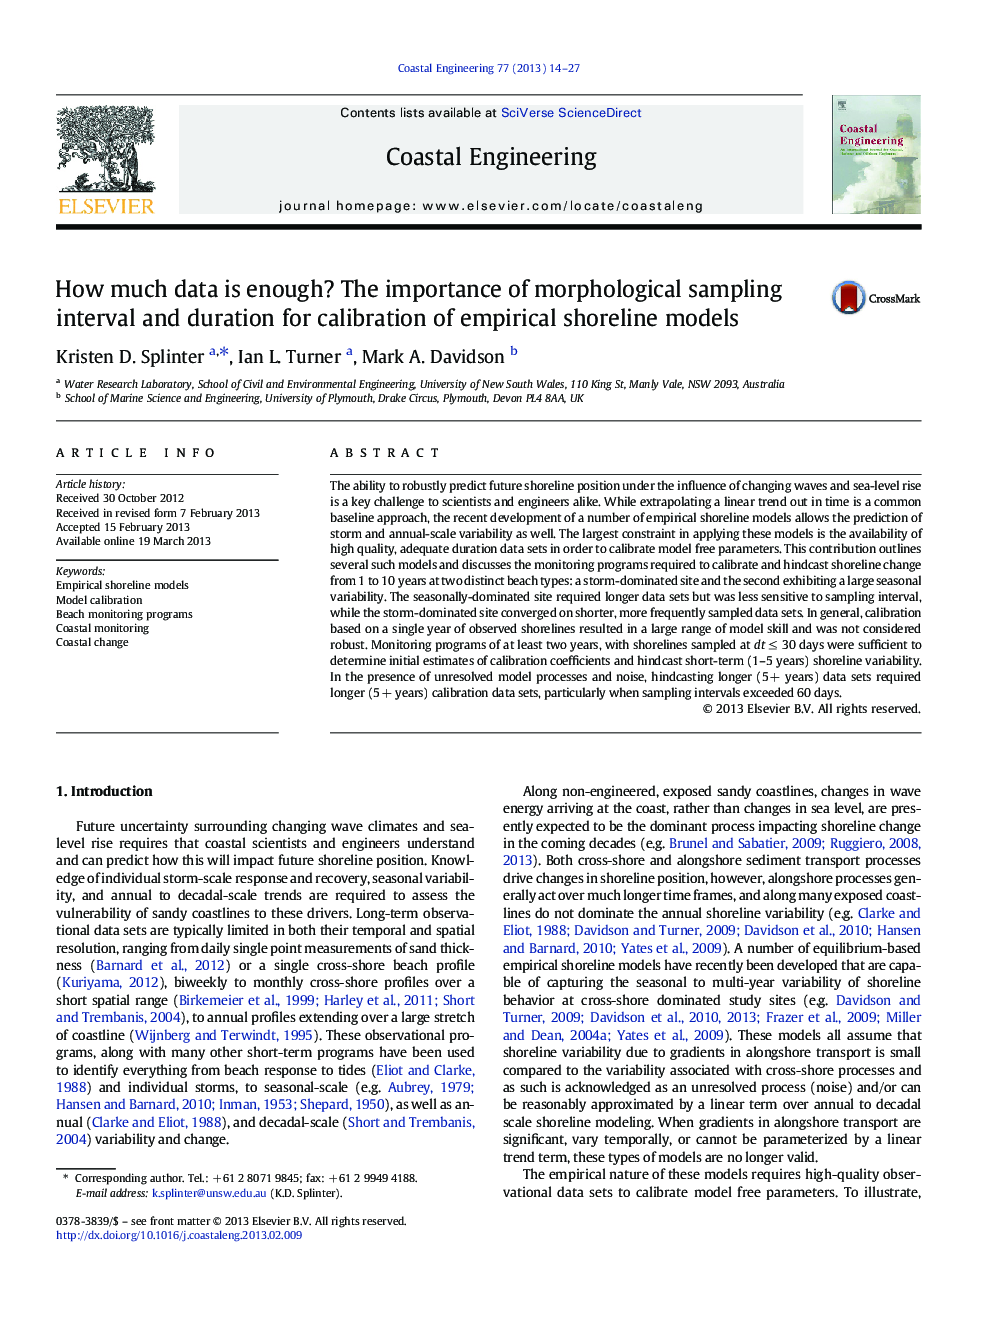 How much data is enough? The importance of morphological sampling interval and duration for calibration of empirical shoreline models